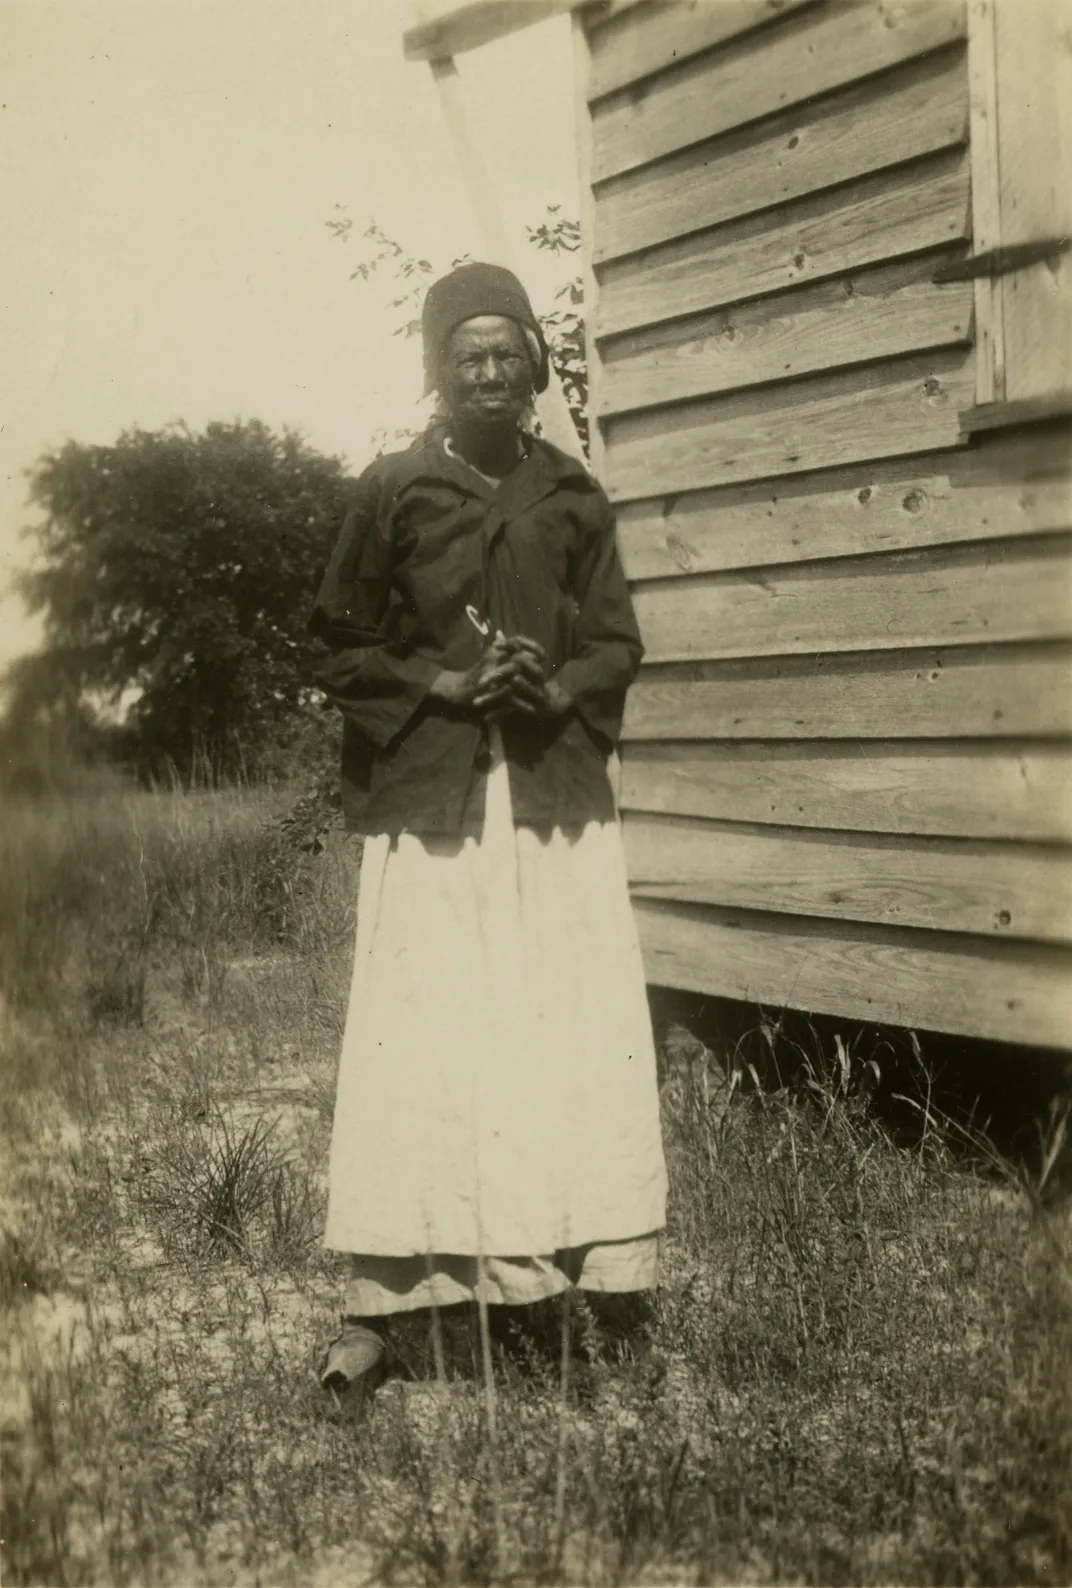 Katie Brown, a Gullah Geechee woman photographed by Turner in the early 1930s